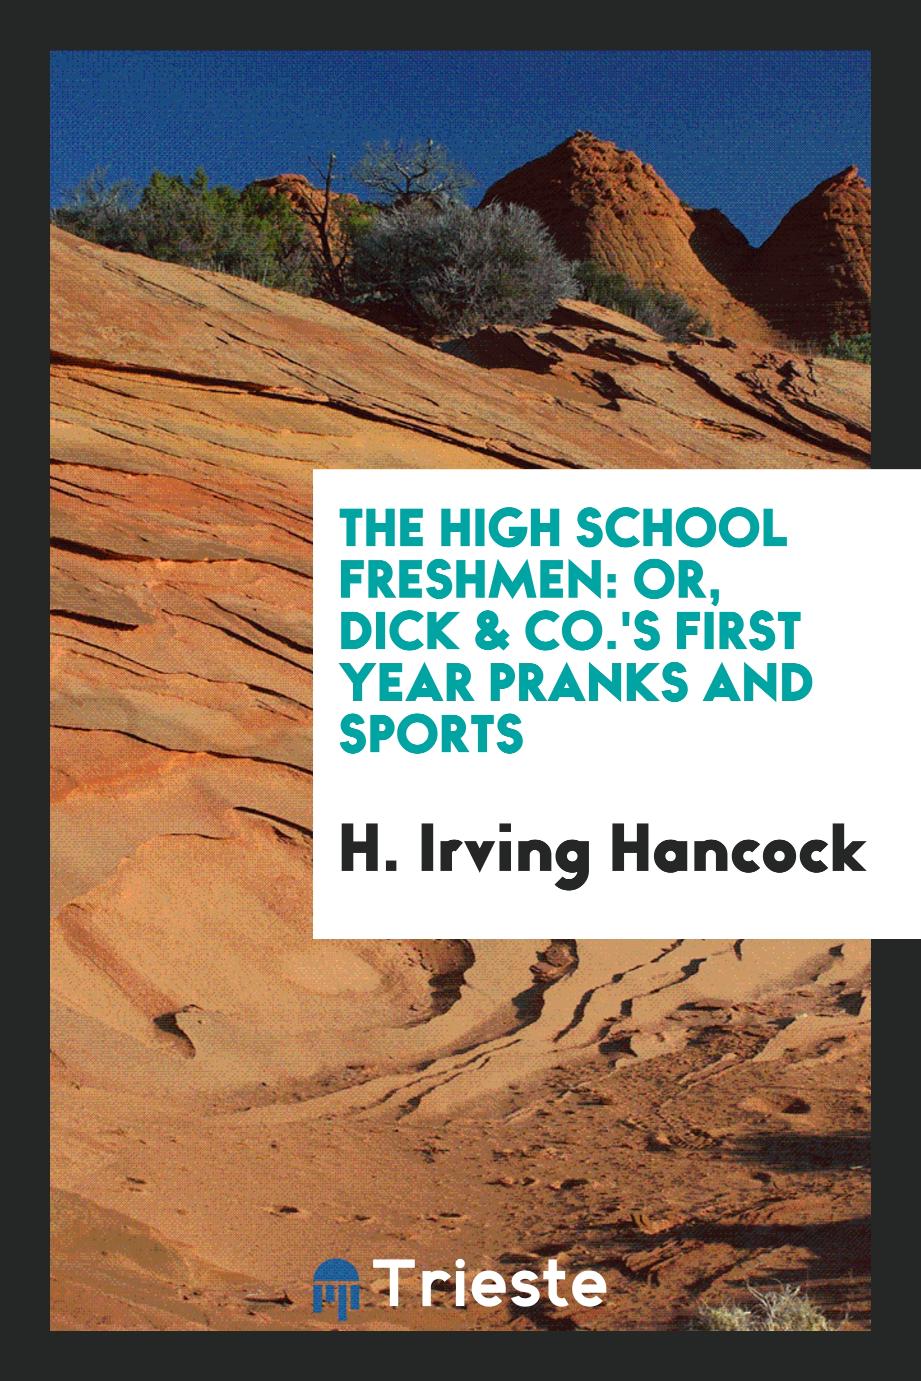 The High School Freshmen: Or, Dick & Co.'s First Year Pranks and Sports